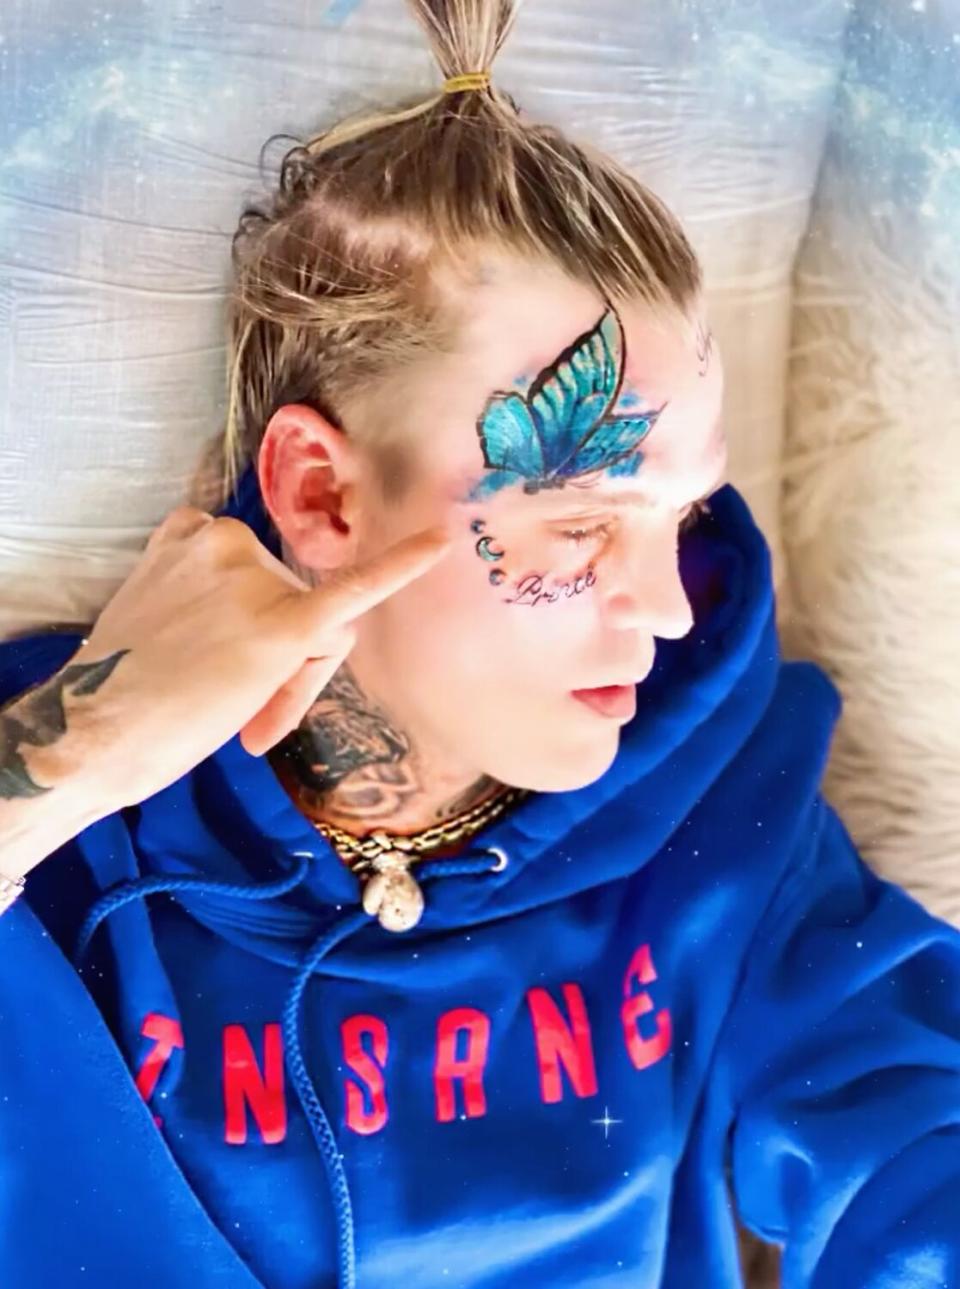 Aaron Carter Gets Giant Butterfly Tattoo on His Face in Honor of Late Sister